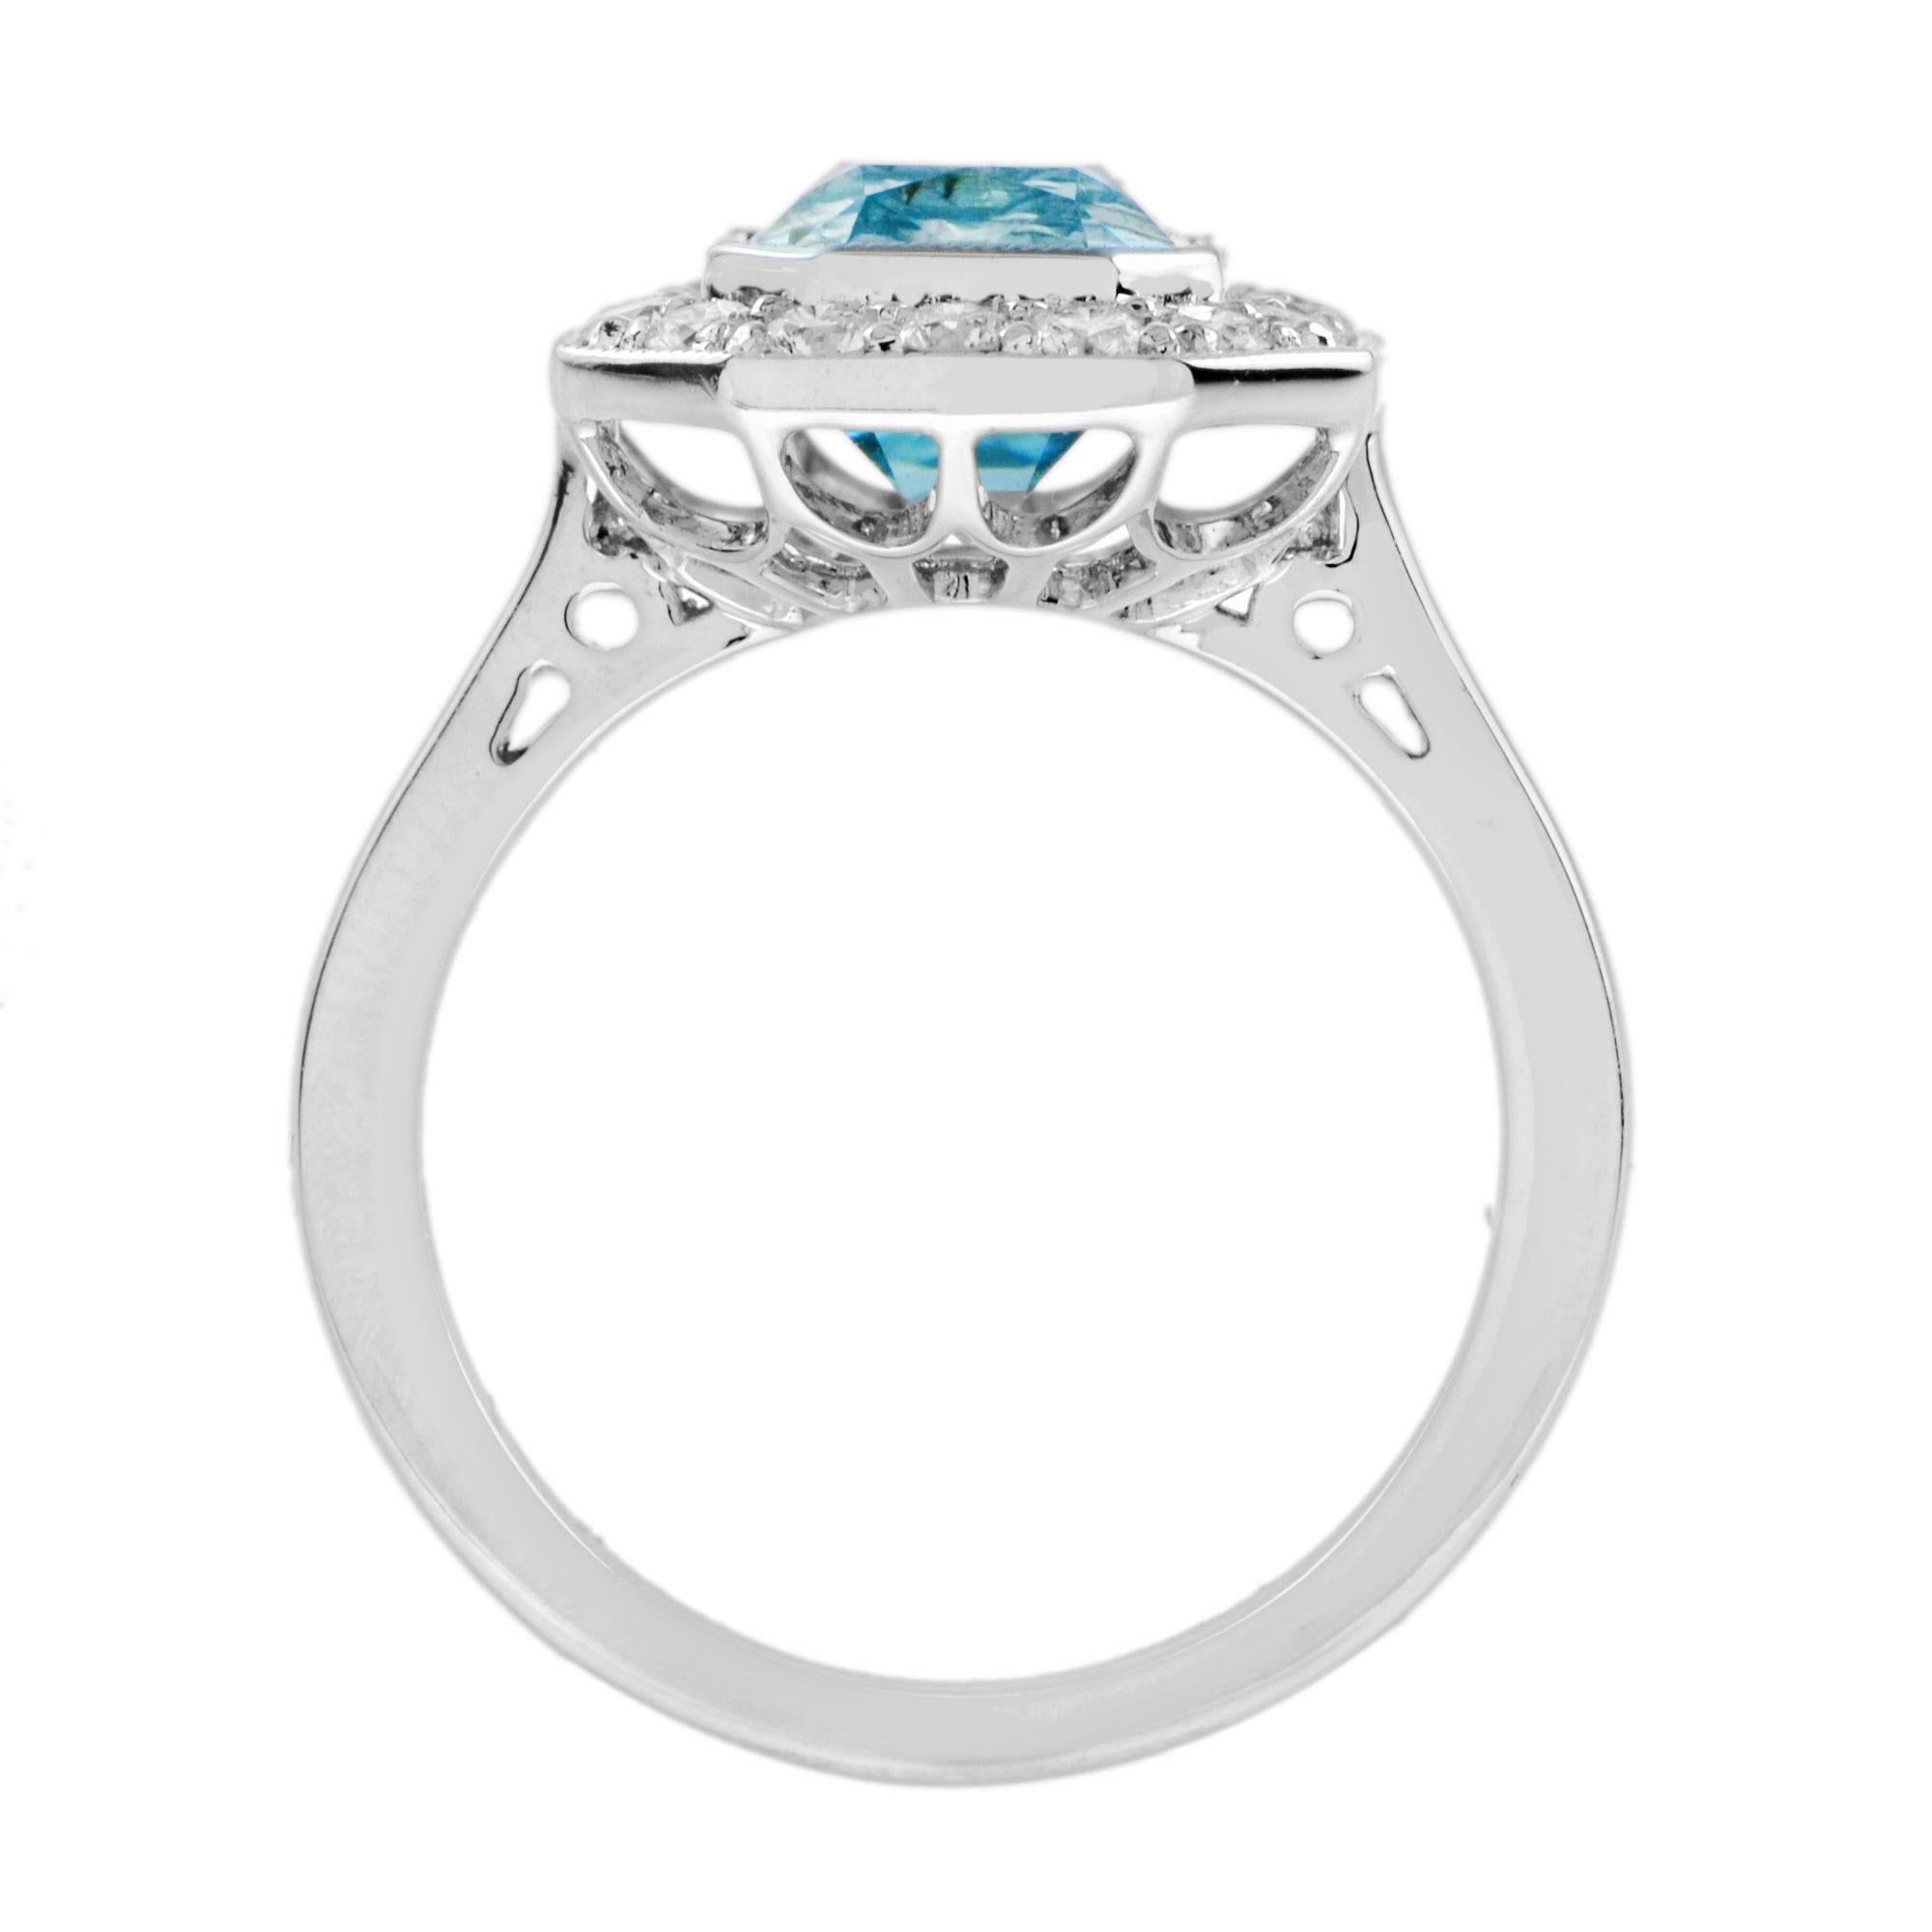 For Sale:  2.7 Ct. Blue Topaz and Diamond Art Deco Style Halo Engagement Ring in 14K Gold 6